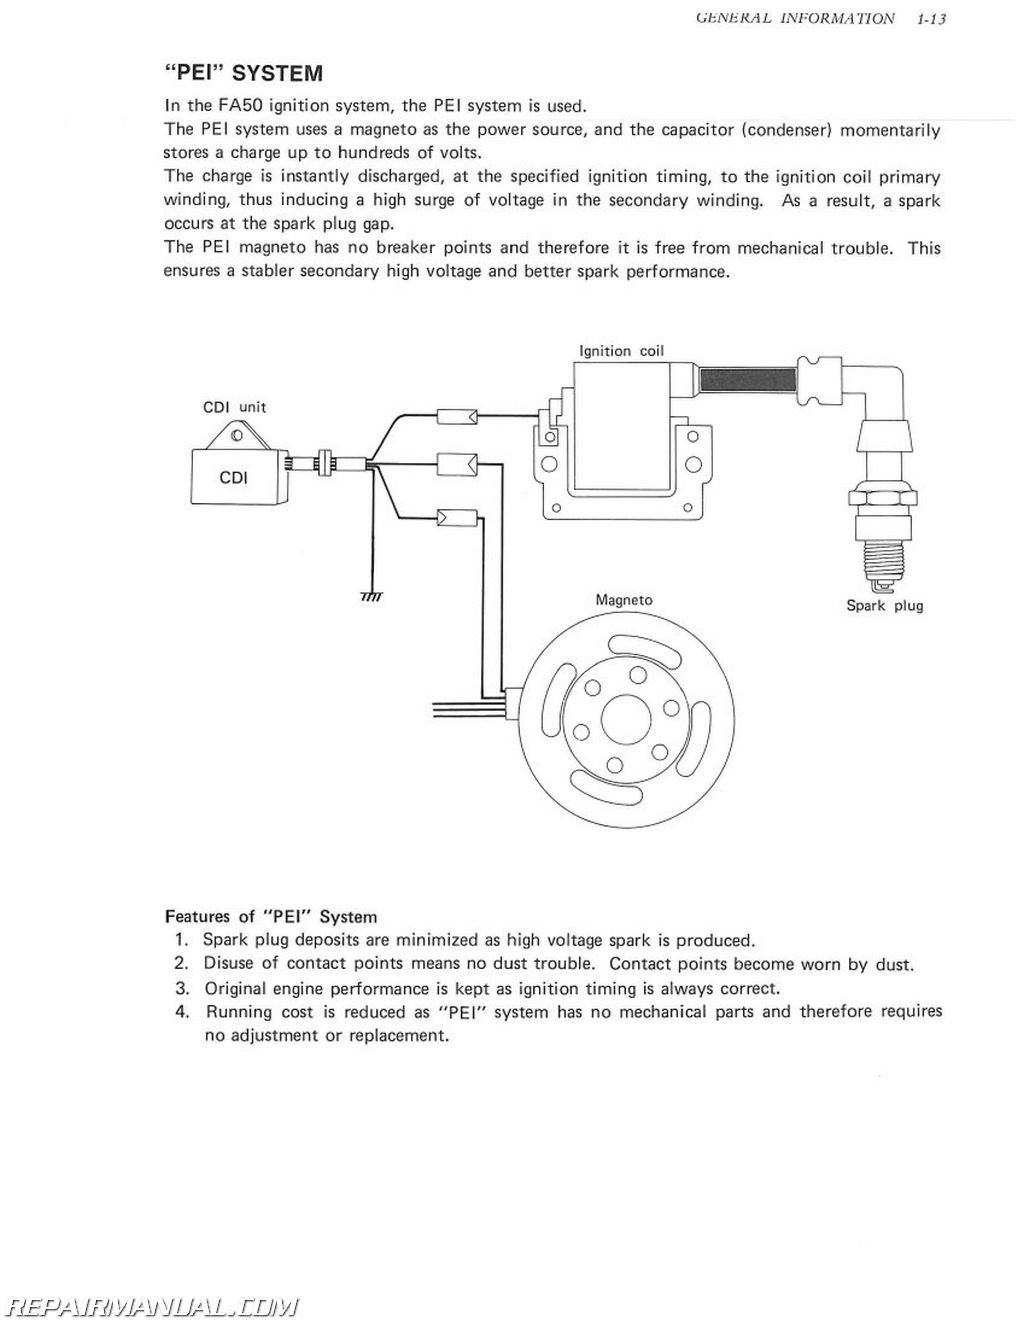 1980 tpg-805 scooter wiring diagram